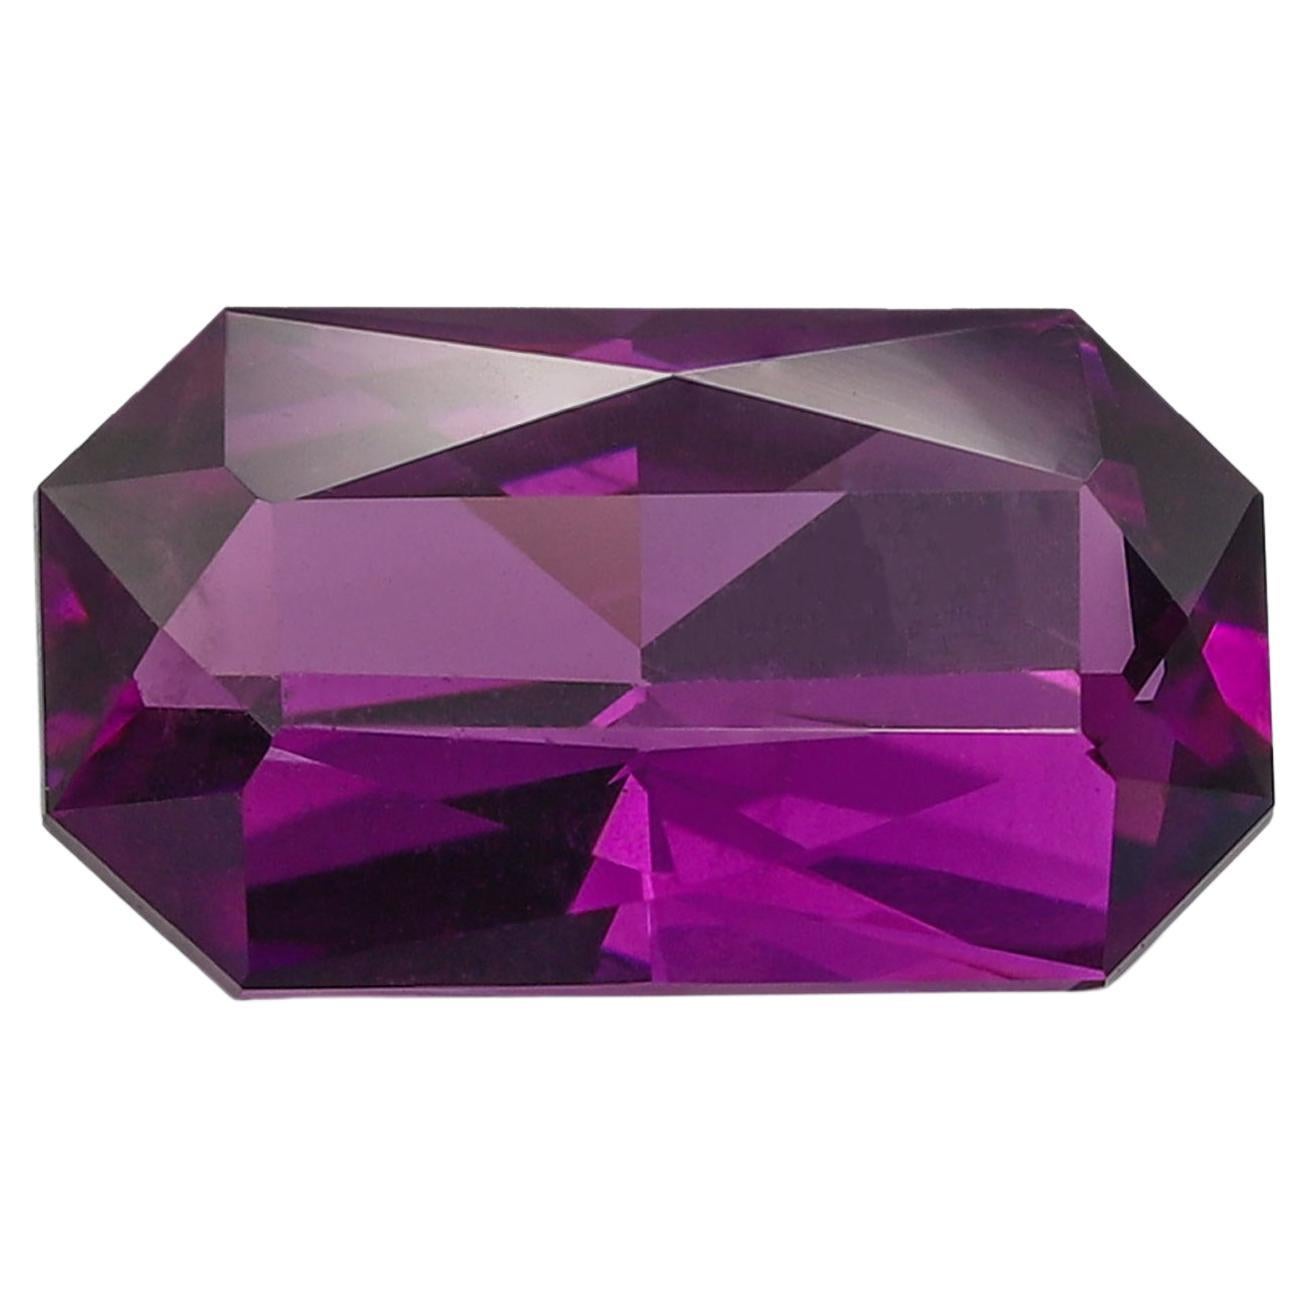 Certified Stone 3.01 Carats Incredible Royal Purple Pyrope Garnet Faceted Garnet For Sale